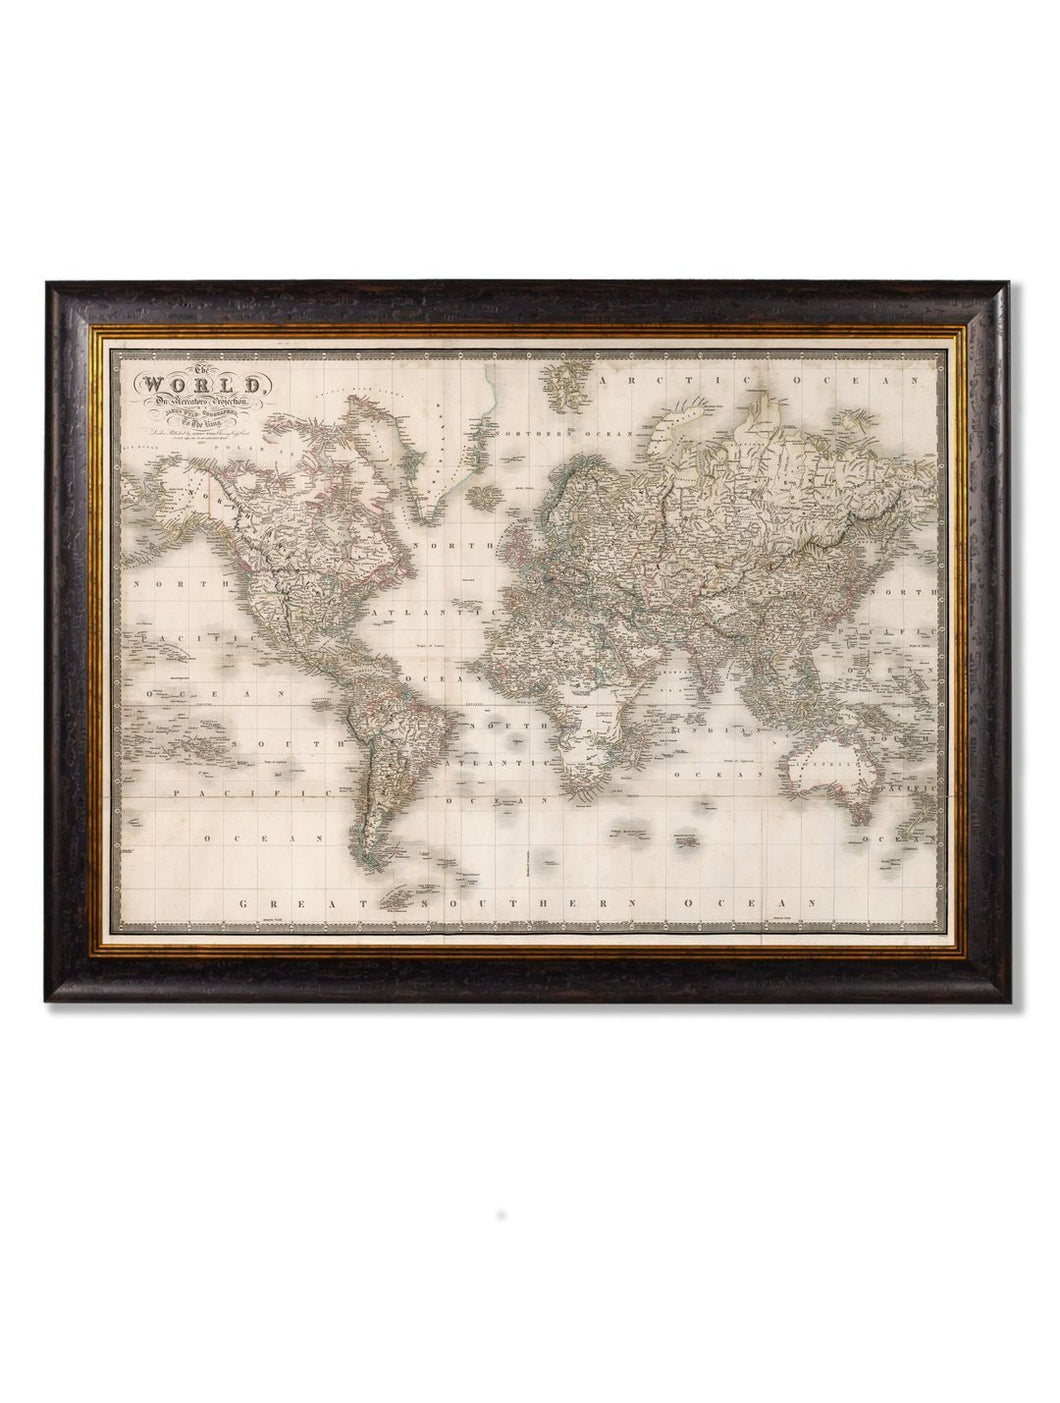 Framed Map Of The World Print - Referenced From An Original 1800s MapVintage FrogPictures & Prints